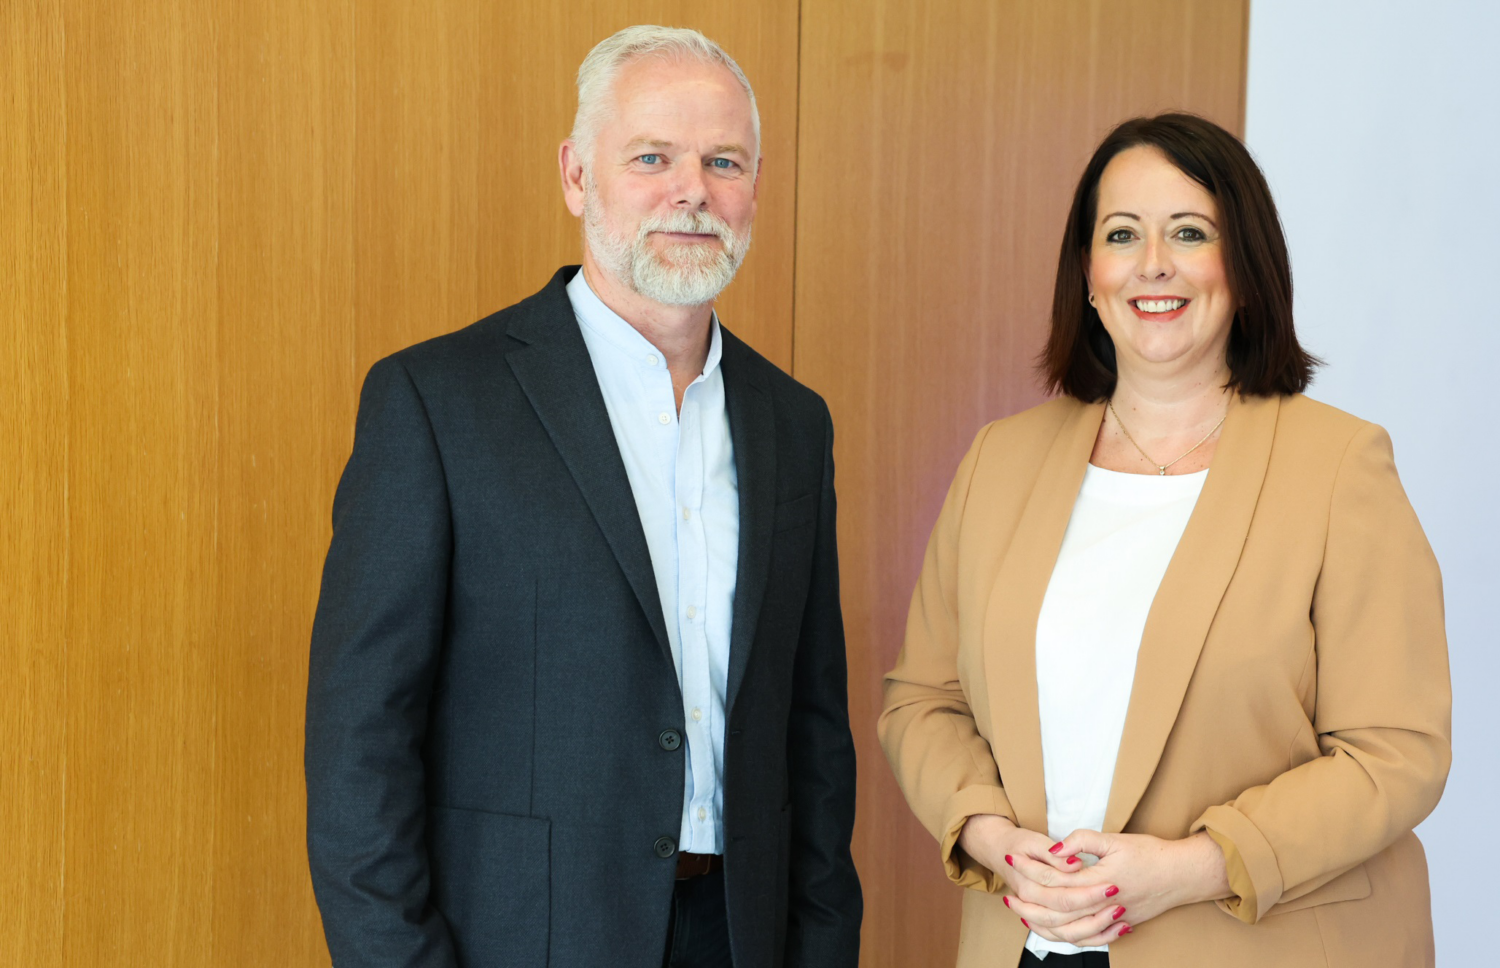 Charlie Tuxworth managing partner at Belfast based innovation consultancy Celsio and founding member of Innovate Island alongside Alison Currie Director of Innovation and Entrepreneurship Inter Trade Ireland 2